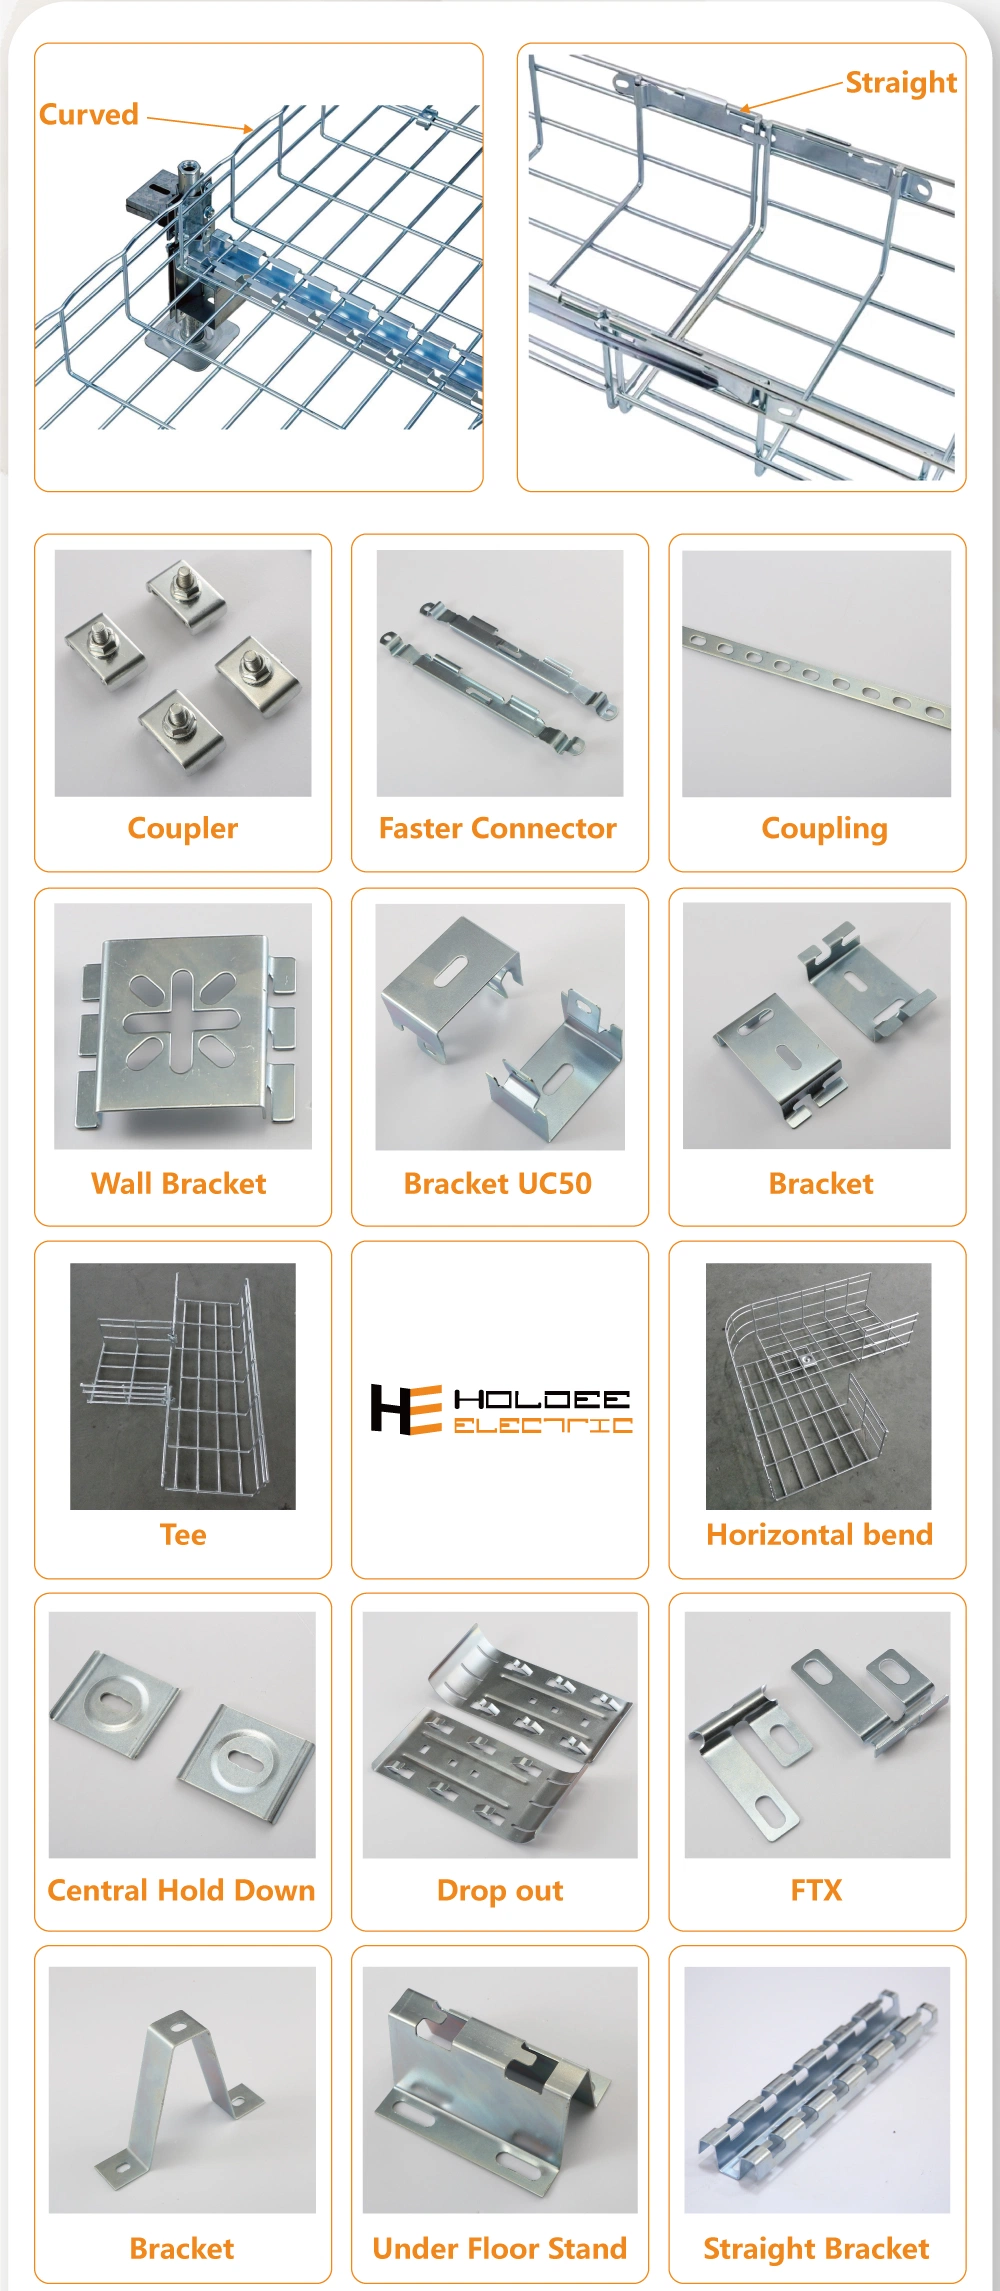 IEC61537 Standard 150mm Stainless Steel Metal Wire Mesh Grid Cable Trays